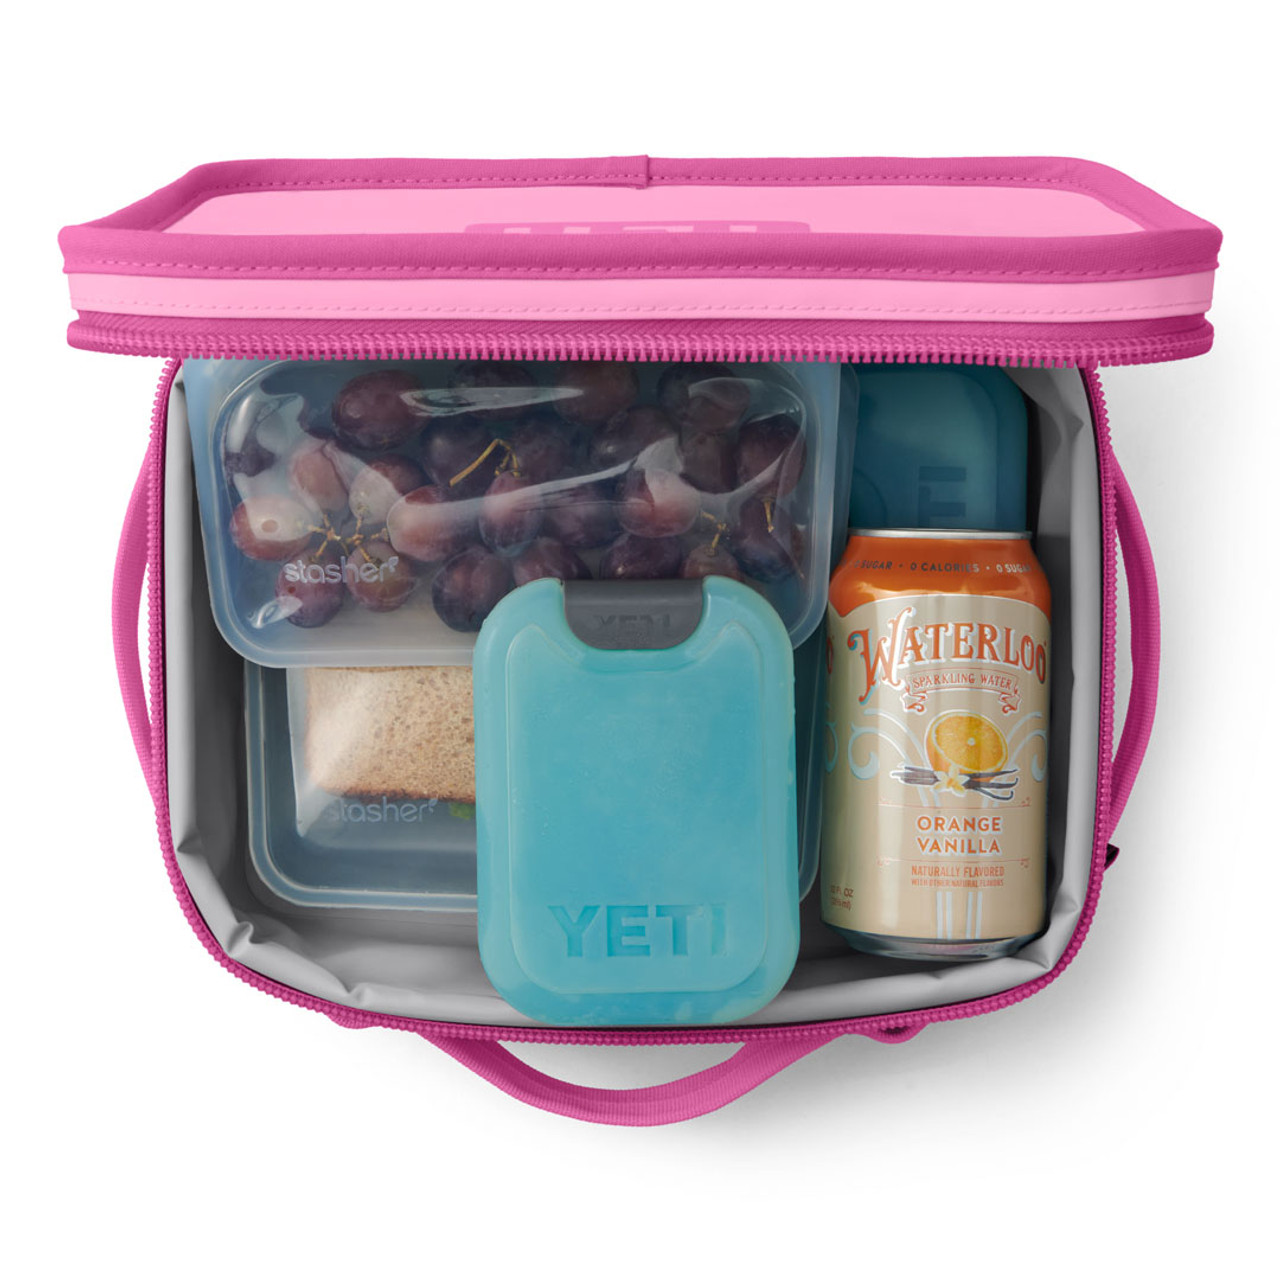 https://cdn11.bigcommerce.com/s-ppsyskcavg/images/stencil/1280x1280/products/68662/248069/YETI_Wholesale_site_studio_Bags_Daytrip_Lunch_Box_Pink_Top_Thin_Ice_1460_B_2400x2400__24151.1694632543.jpg?c=2?imbypass=on